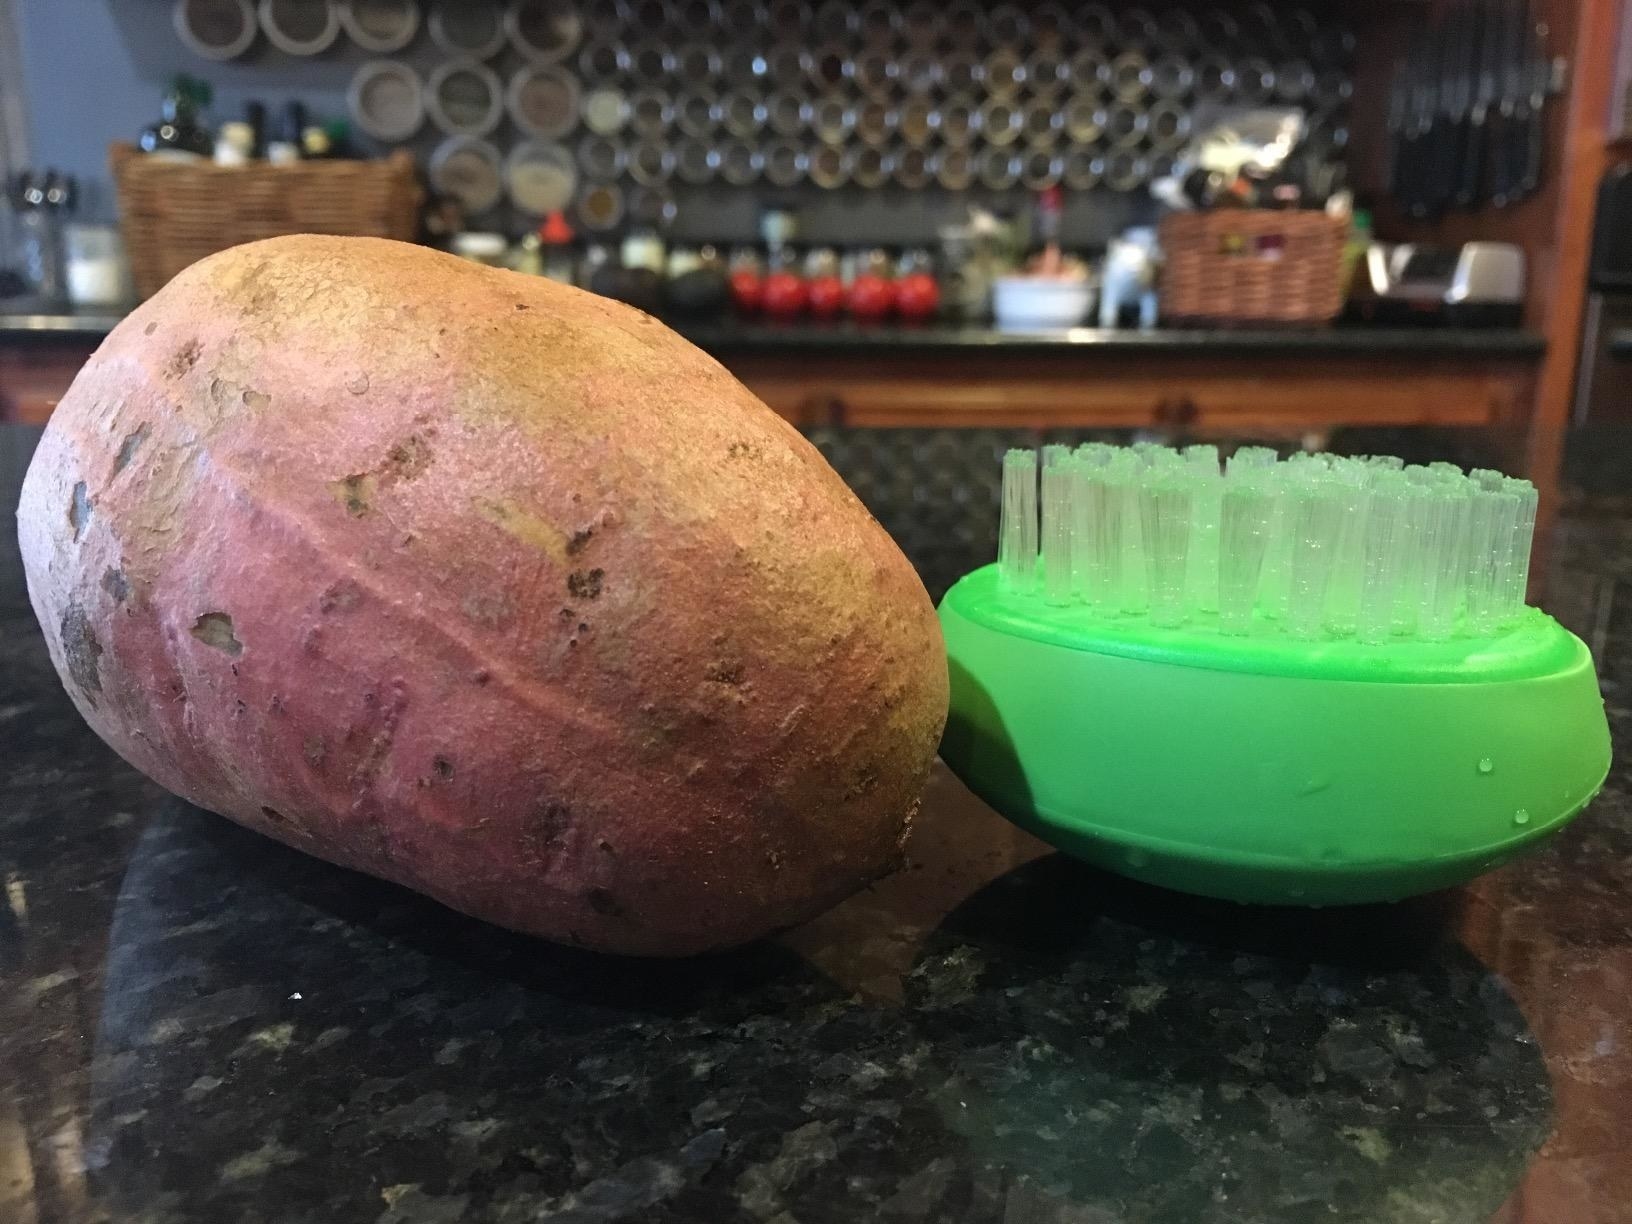 Reviewer image of brush next to a potato